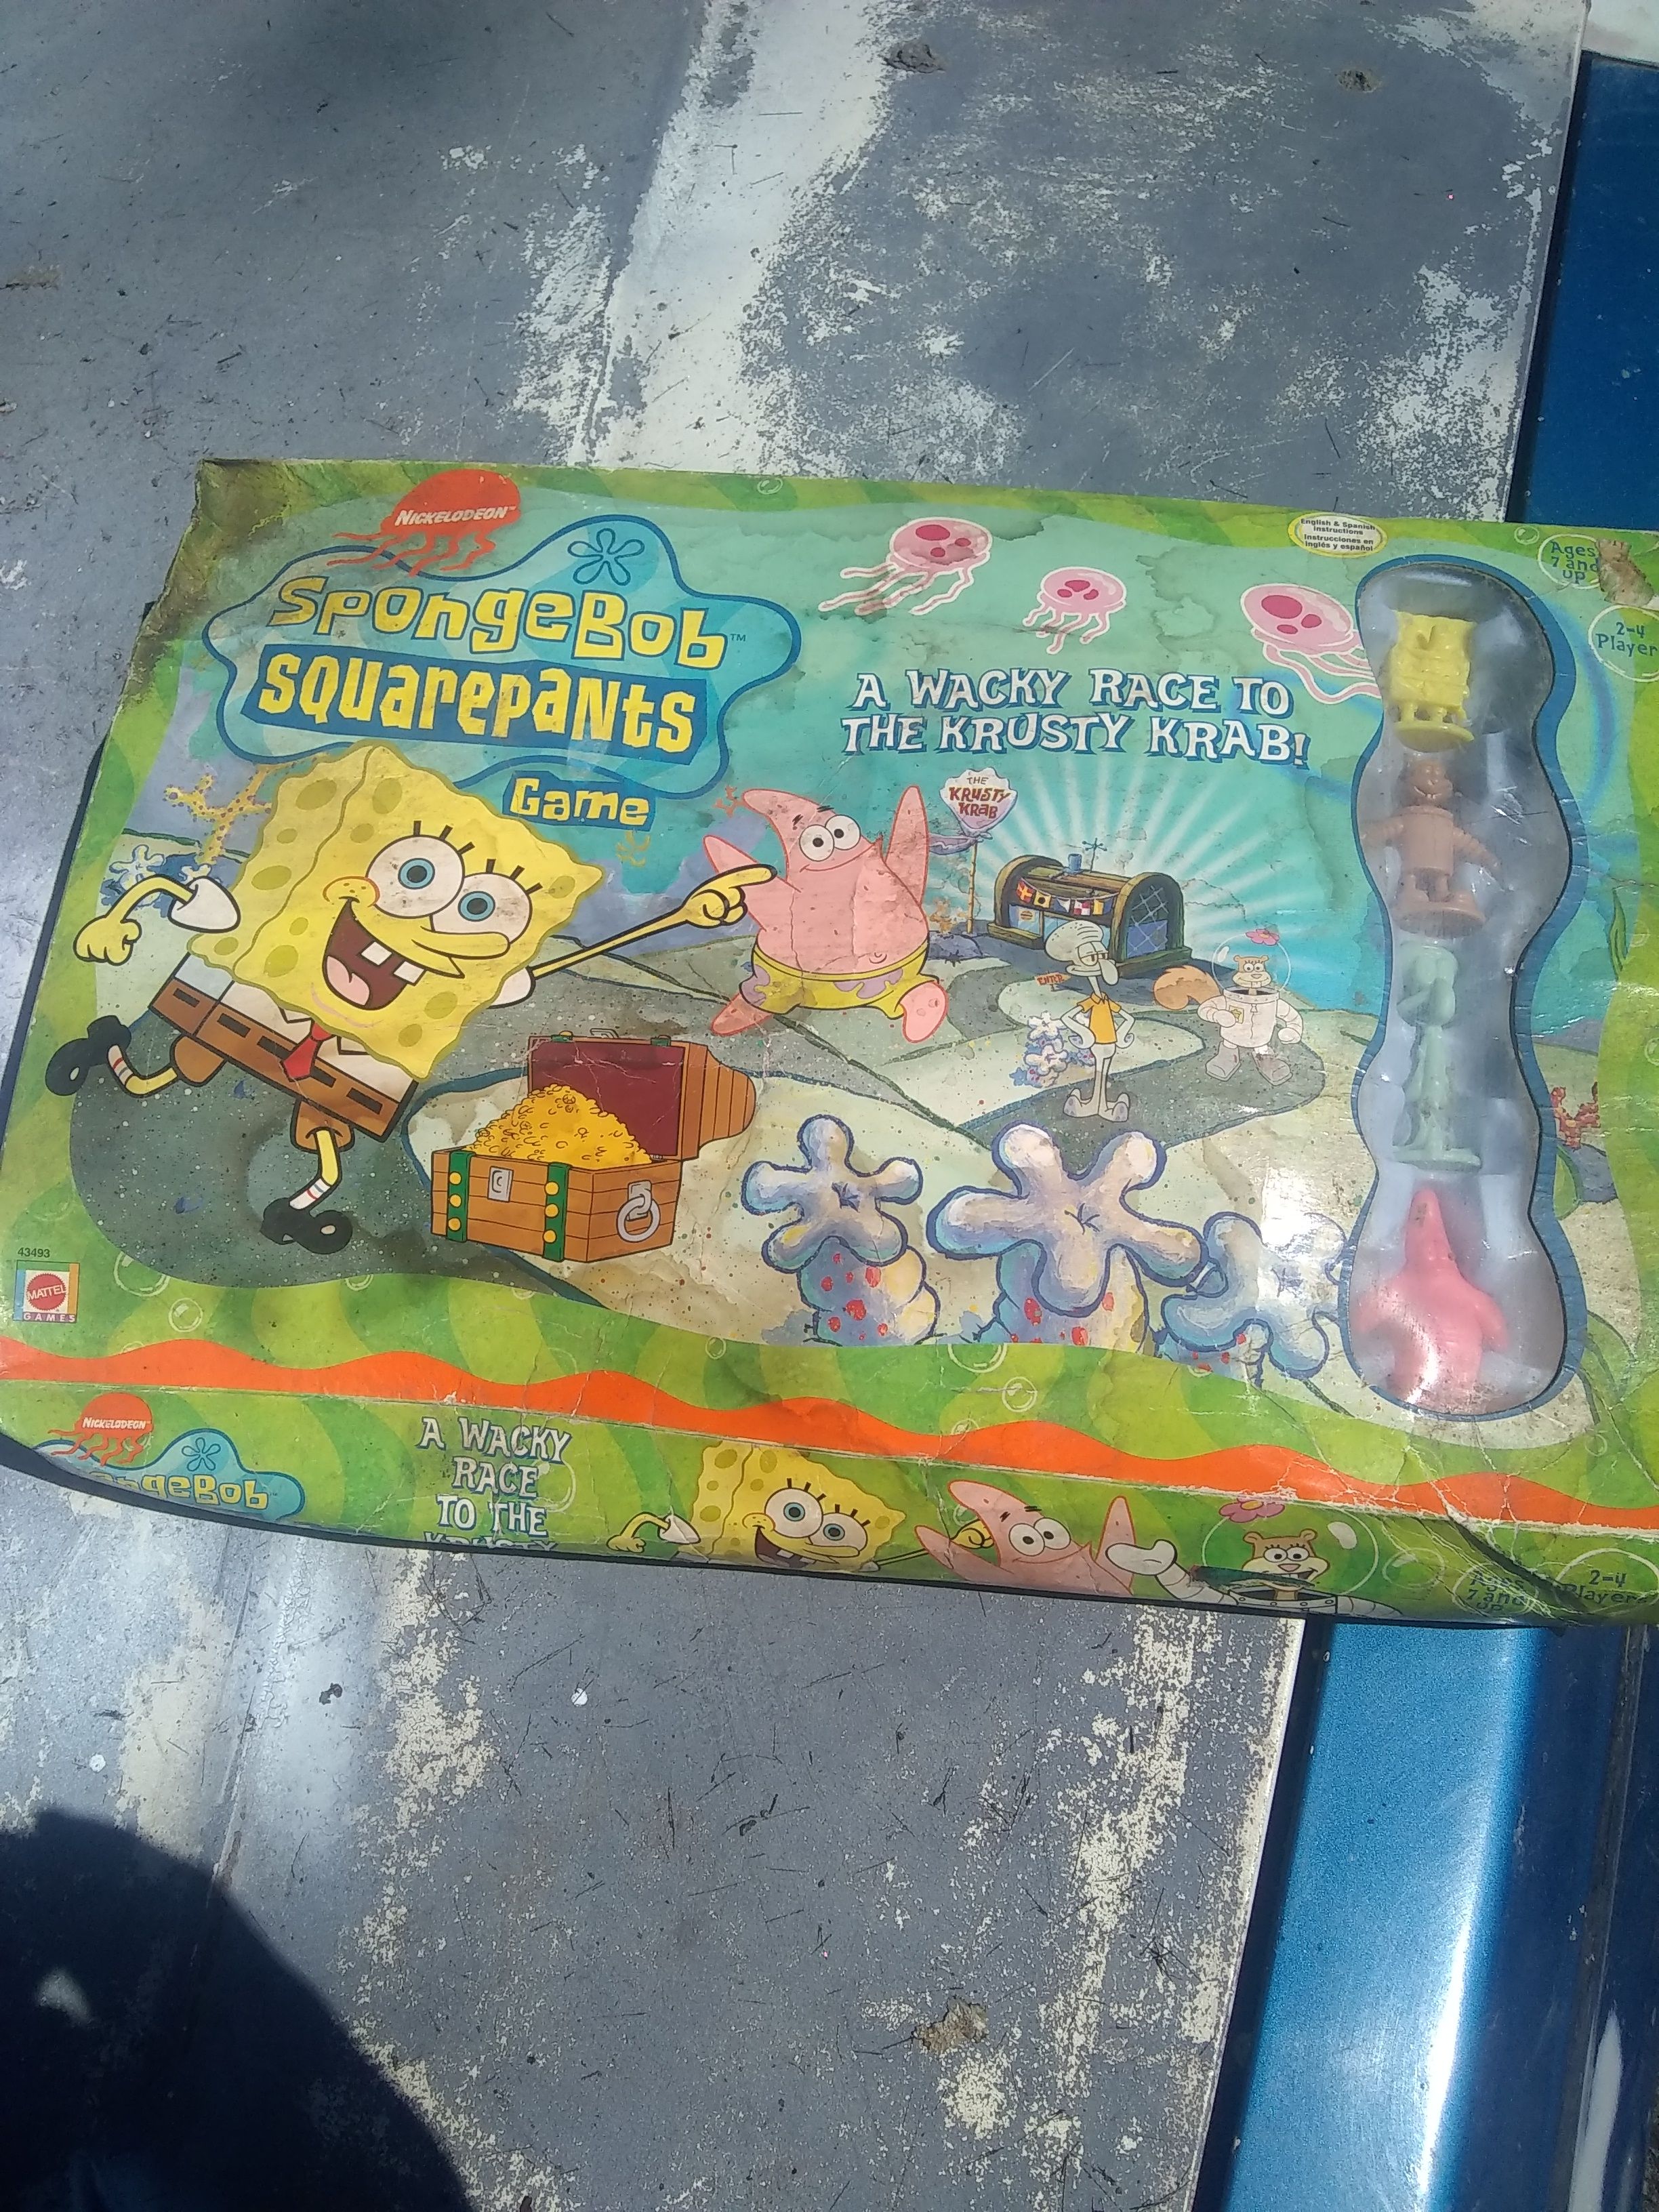 Sponge Bob square pants board game,all there,other sites at $59, box shows wear. It'll ship.